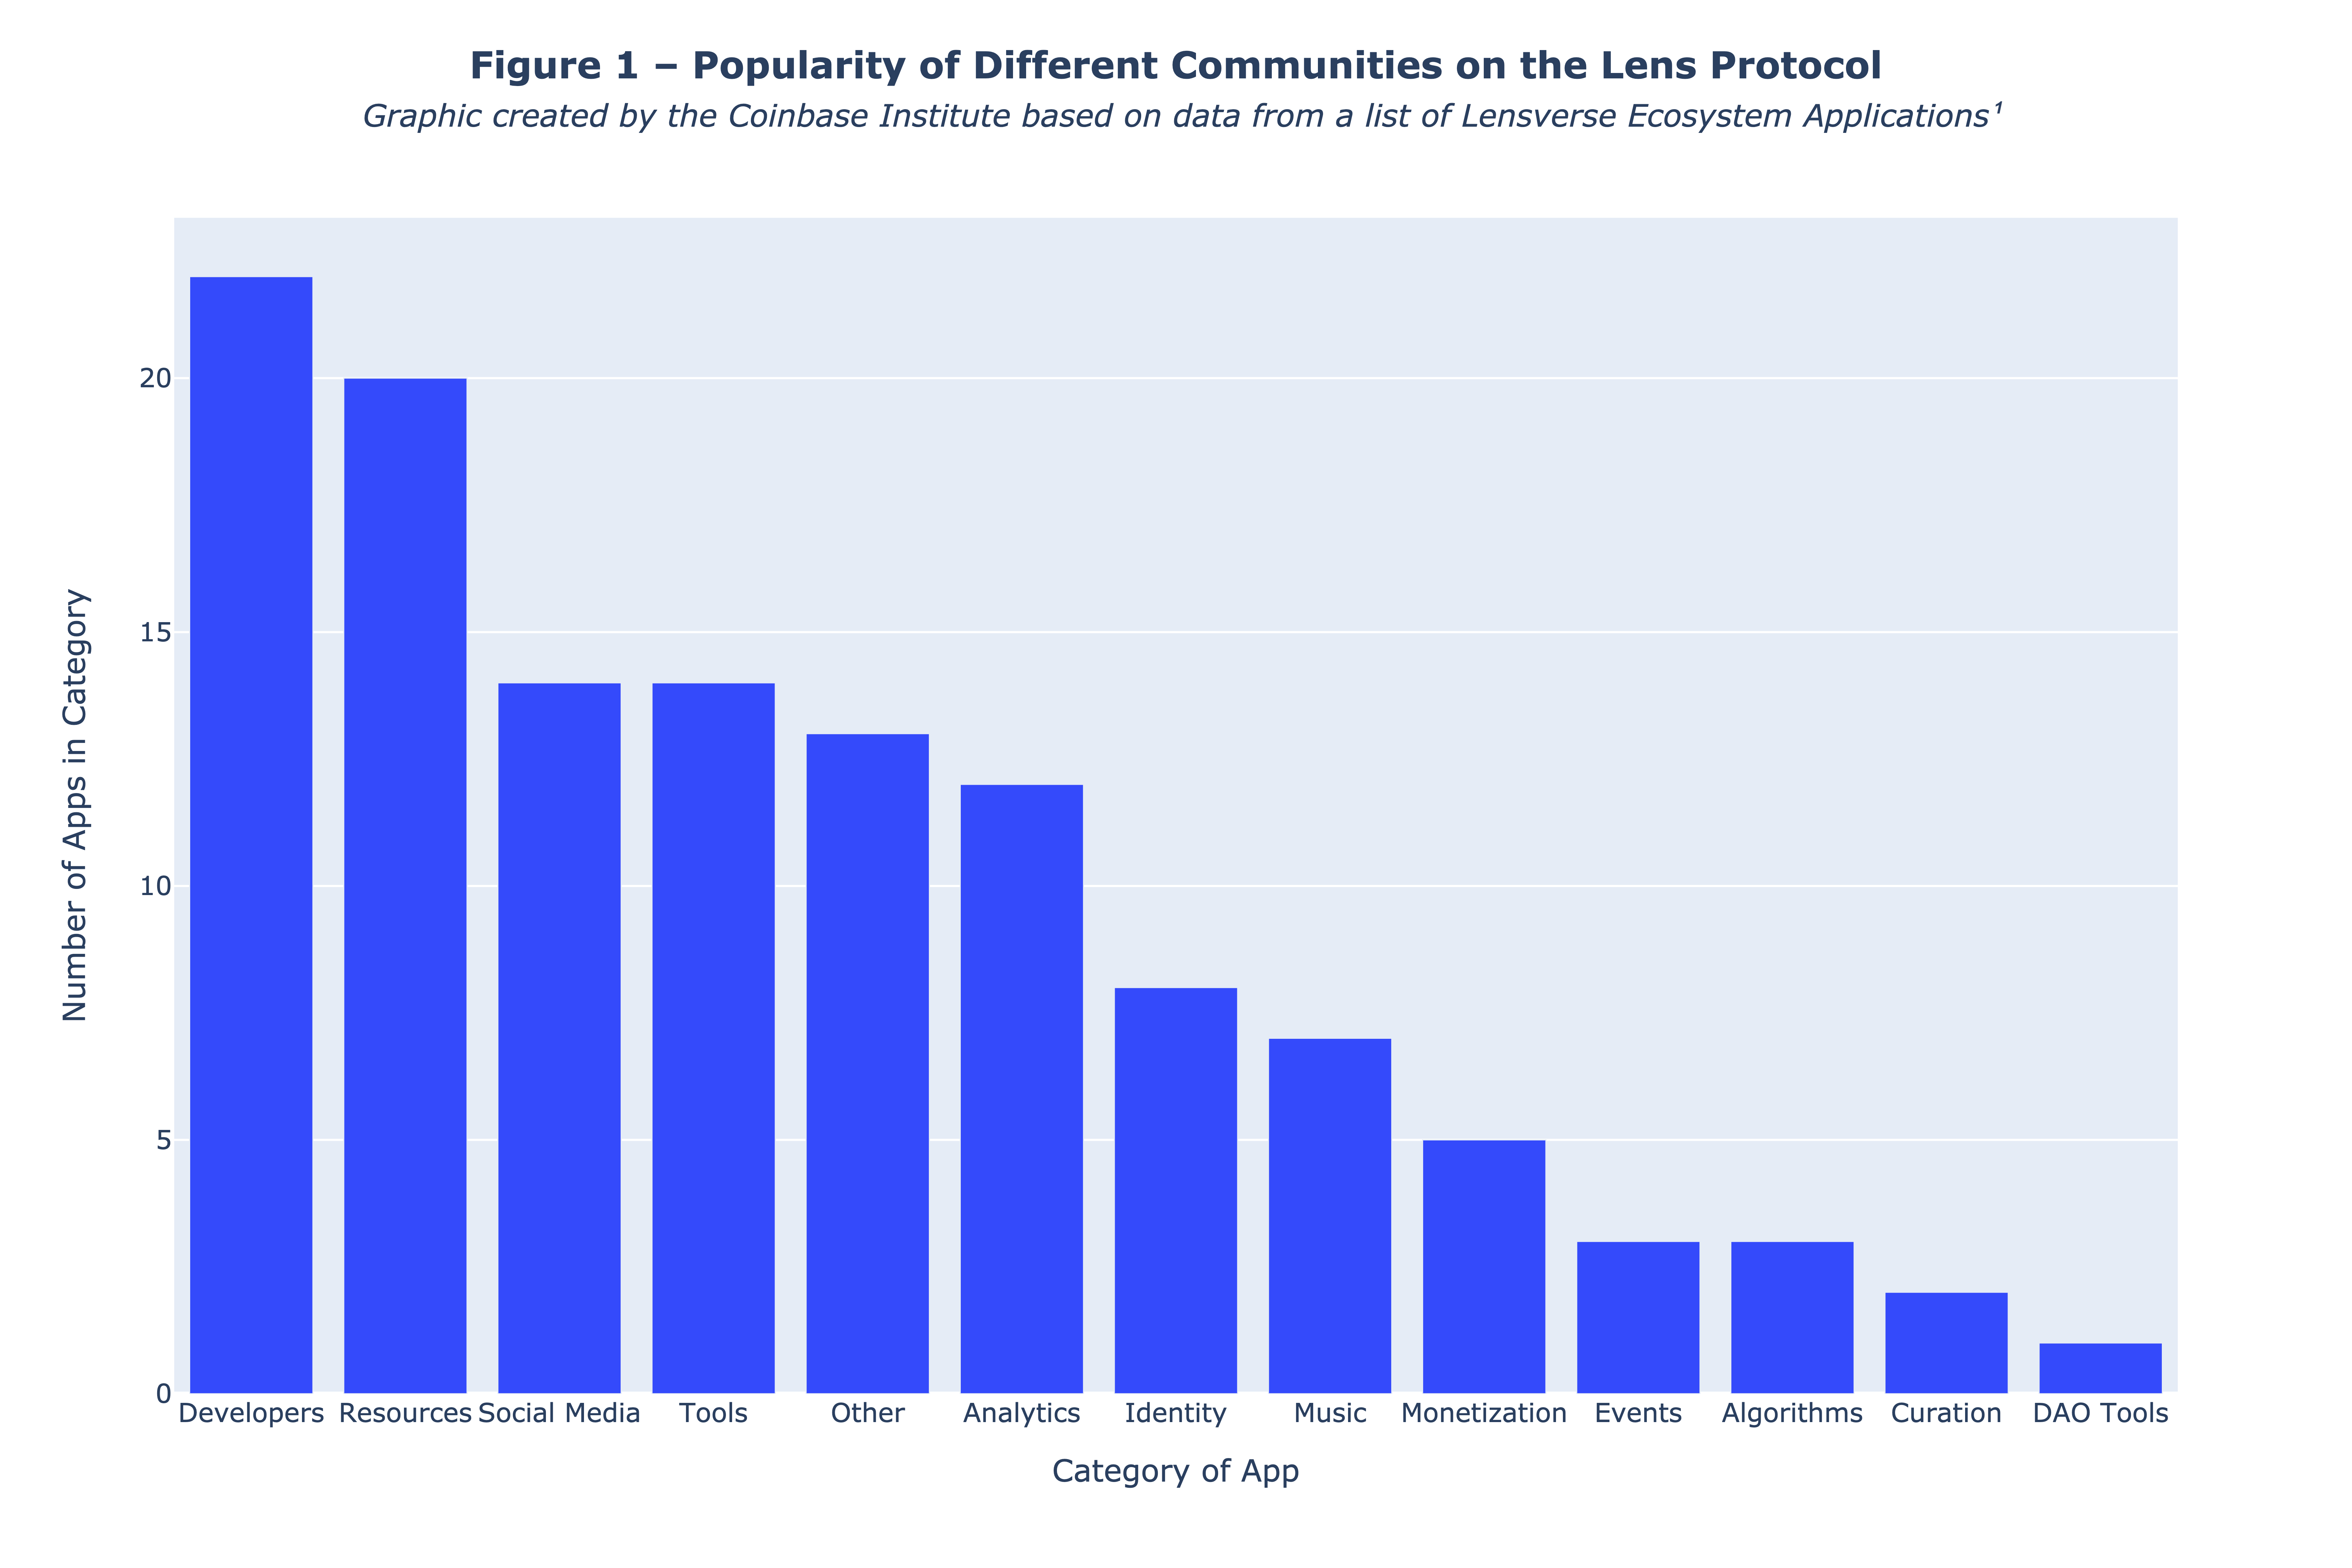 Popularity of Different Communities on the Lens Protocol